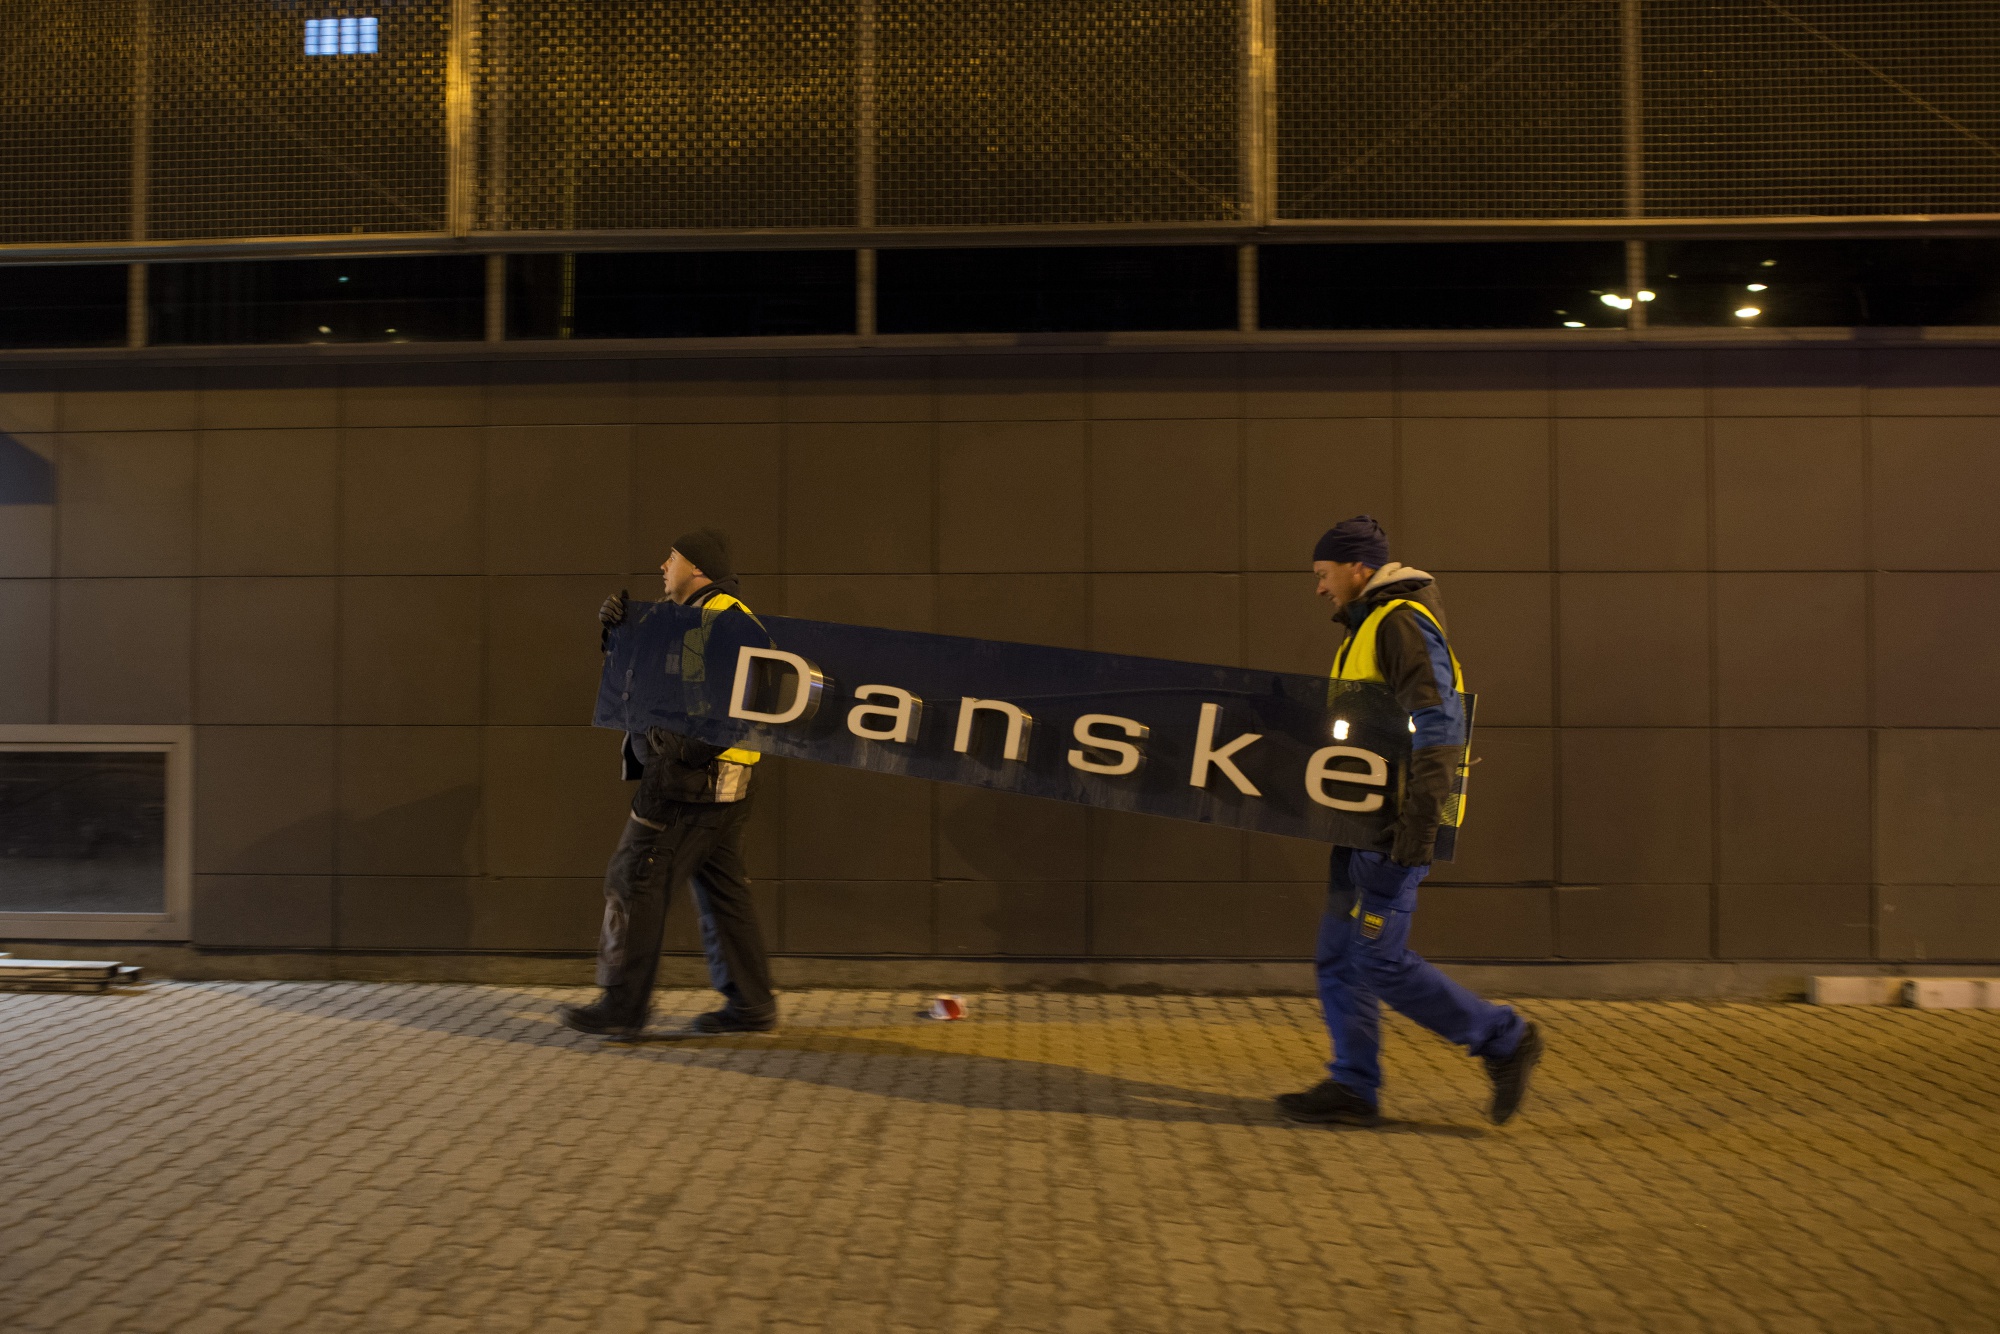 Workers remove Danske signage and carry it to a trailer at the former Danske Bank A/S branch in Tallinn.